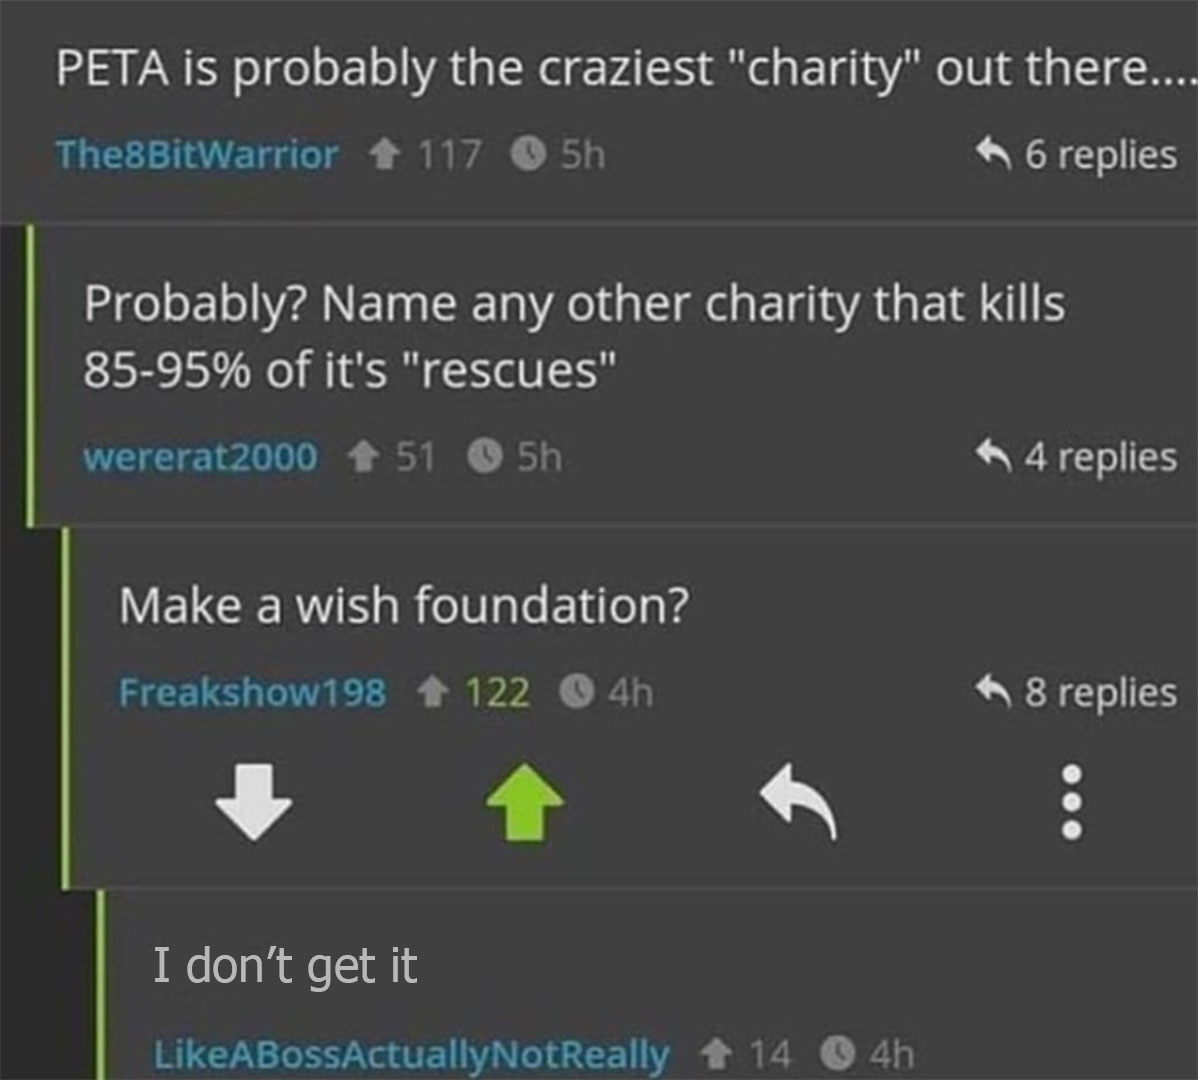 screenshot - Peta is probably the craziest "charity" out there.... The8BitWarrior 117 5h 6 replies Probably? Name any other charity that kills 8595% of it's "rescues" wererat2000 51 O 5h 4 replies Make a wish foundation? Freakshow198 122 o 4h 8 replies 'I